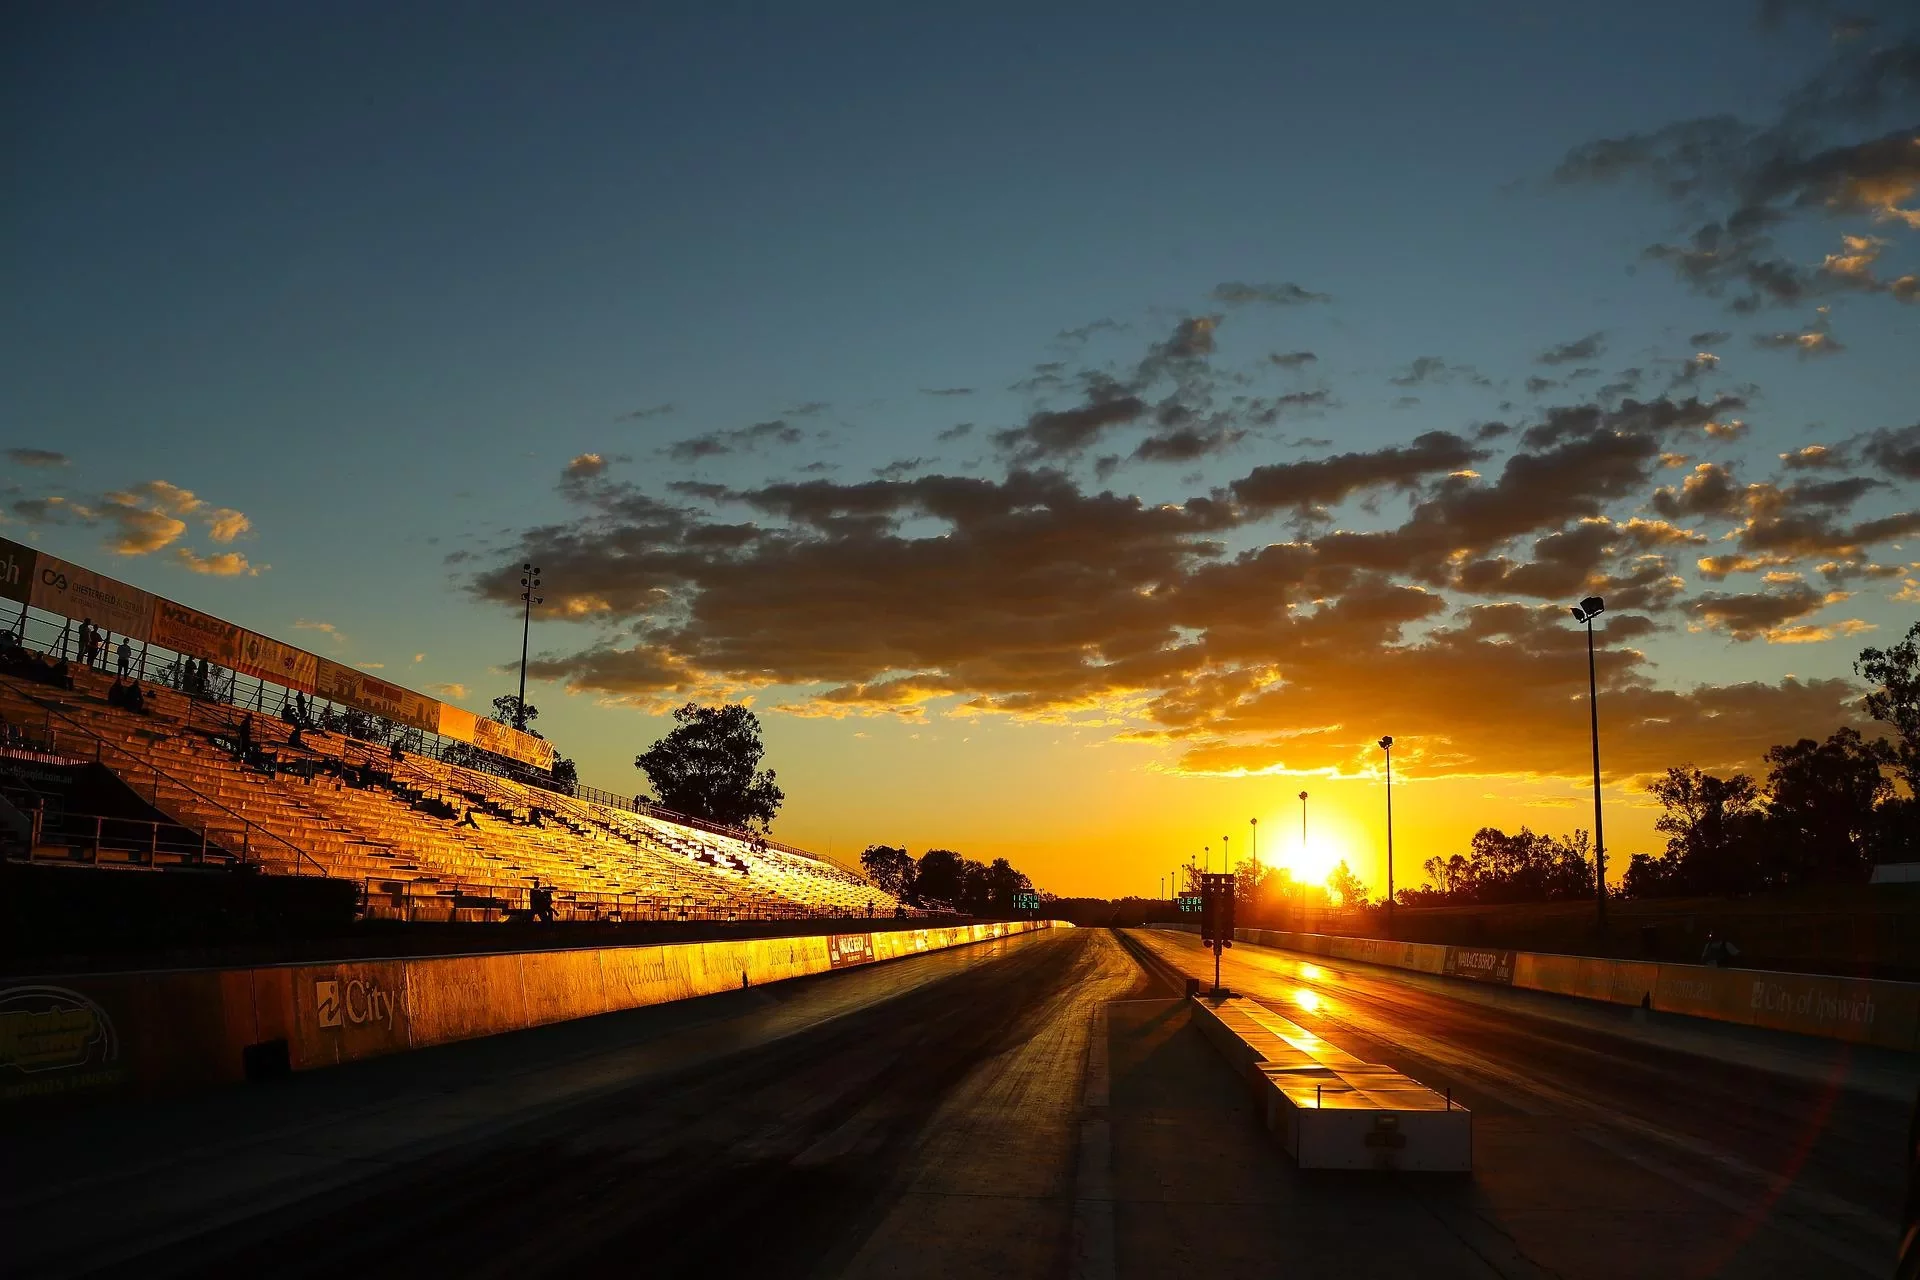 This racetrack is the time God has given you to decide if you will live for Him or if you decide to live for yourself.